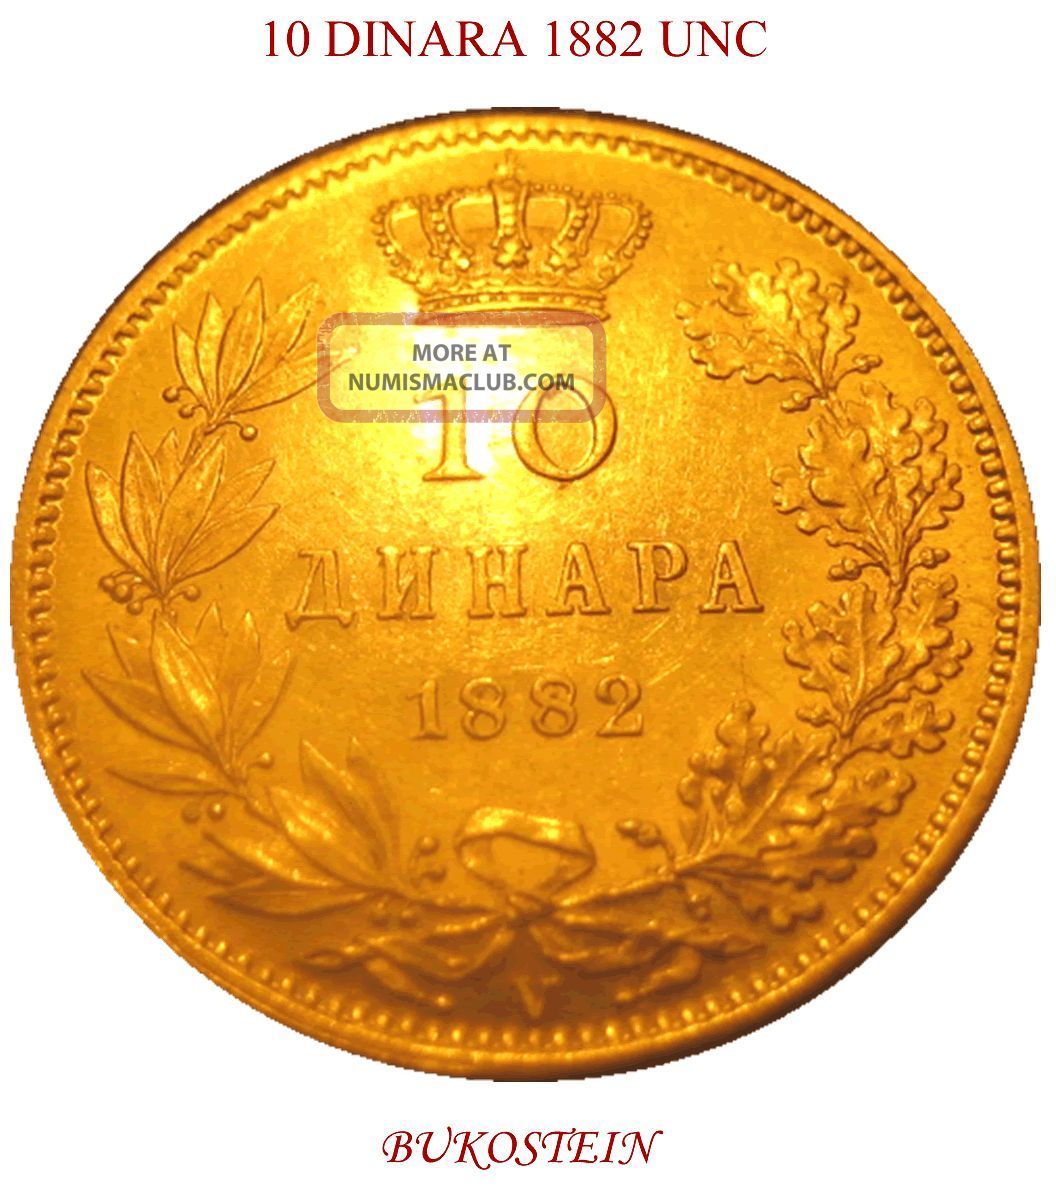 10 Dinara 1882 Gold Coin - Rarely In This Quality